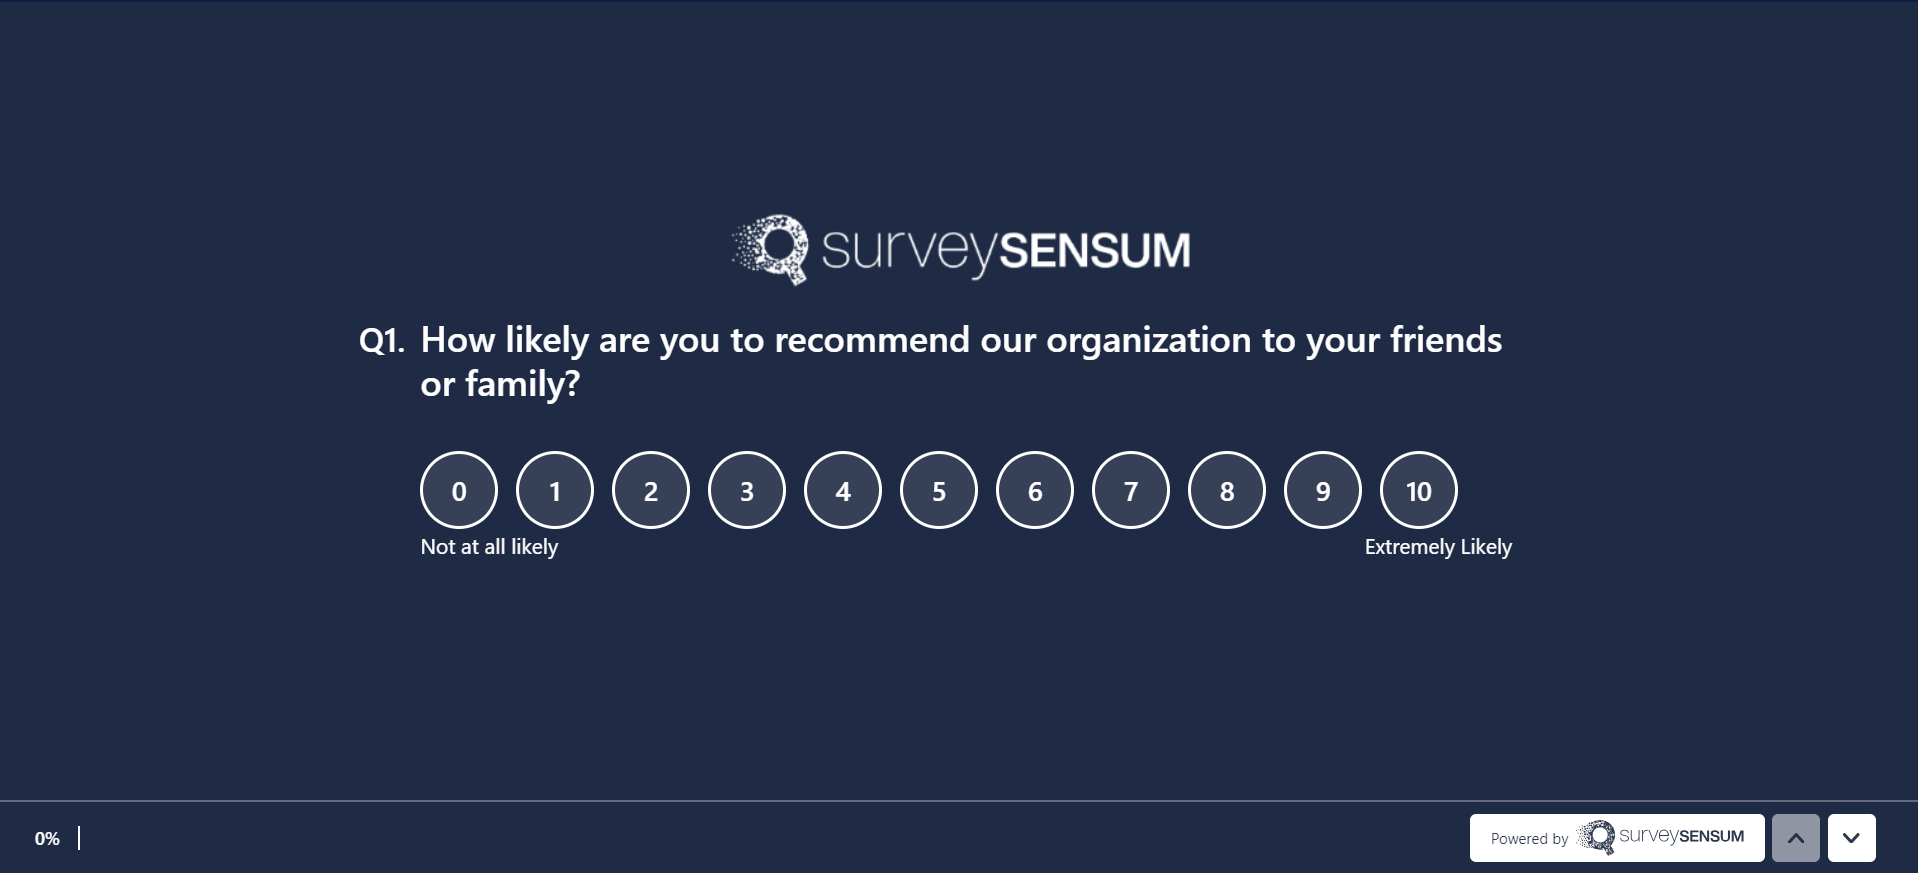  This is the image of an eNPS survey where a user is being asked to rate their likelihood of recommending the company to friends and family, on a scale of 0-10. 